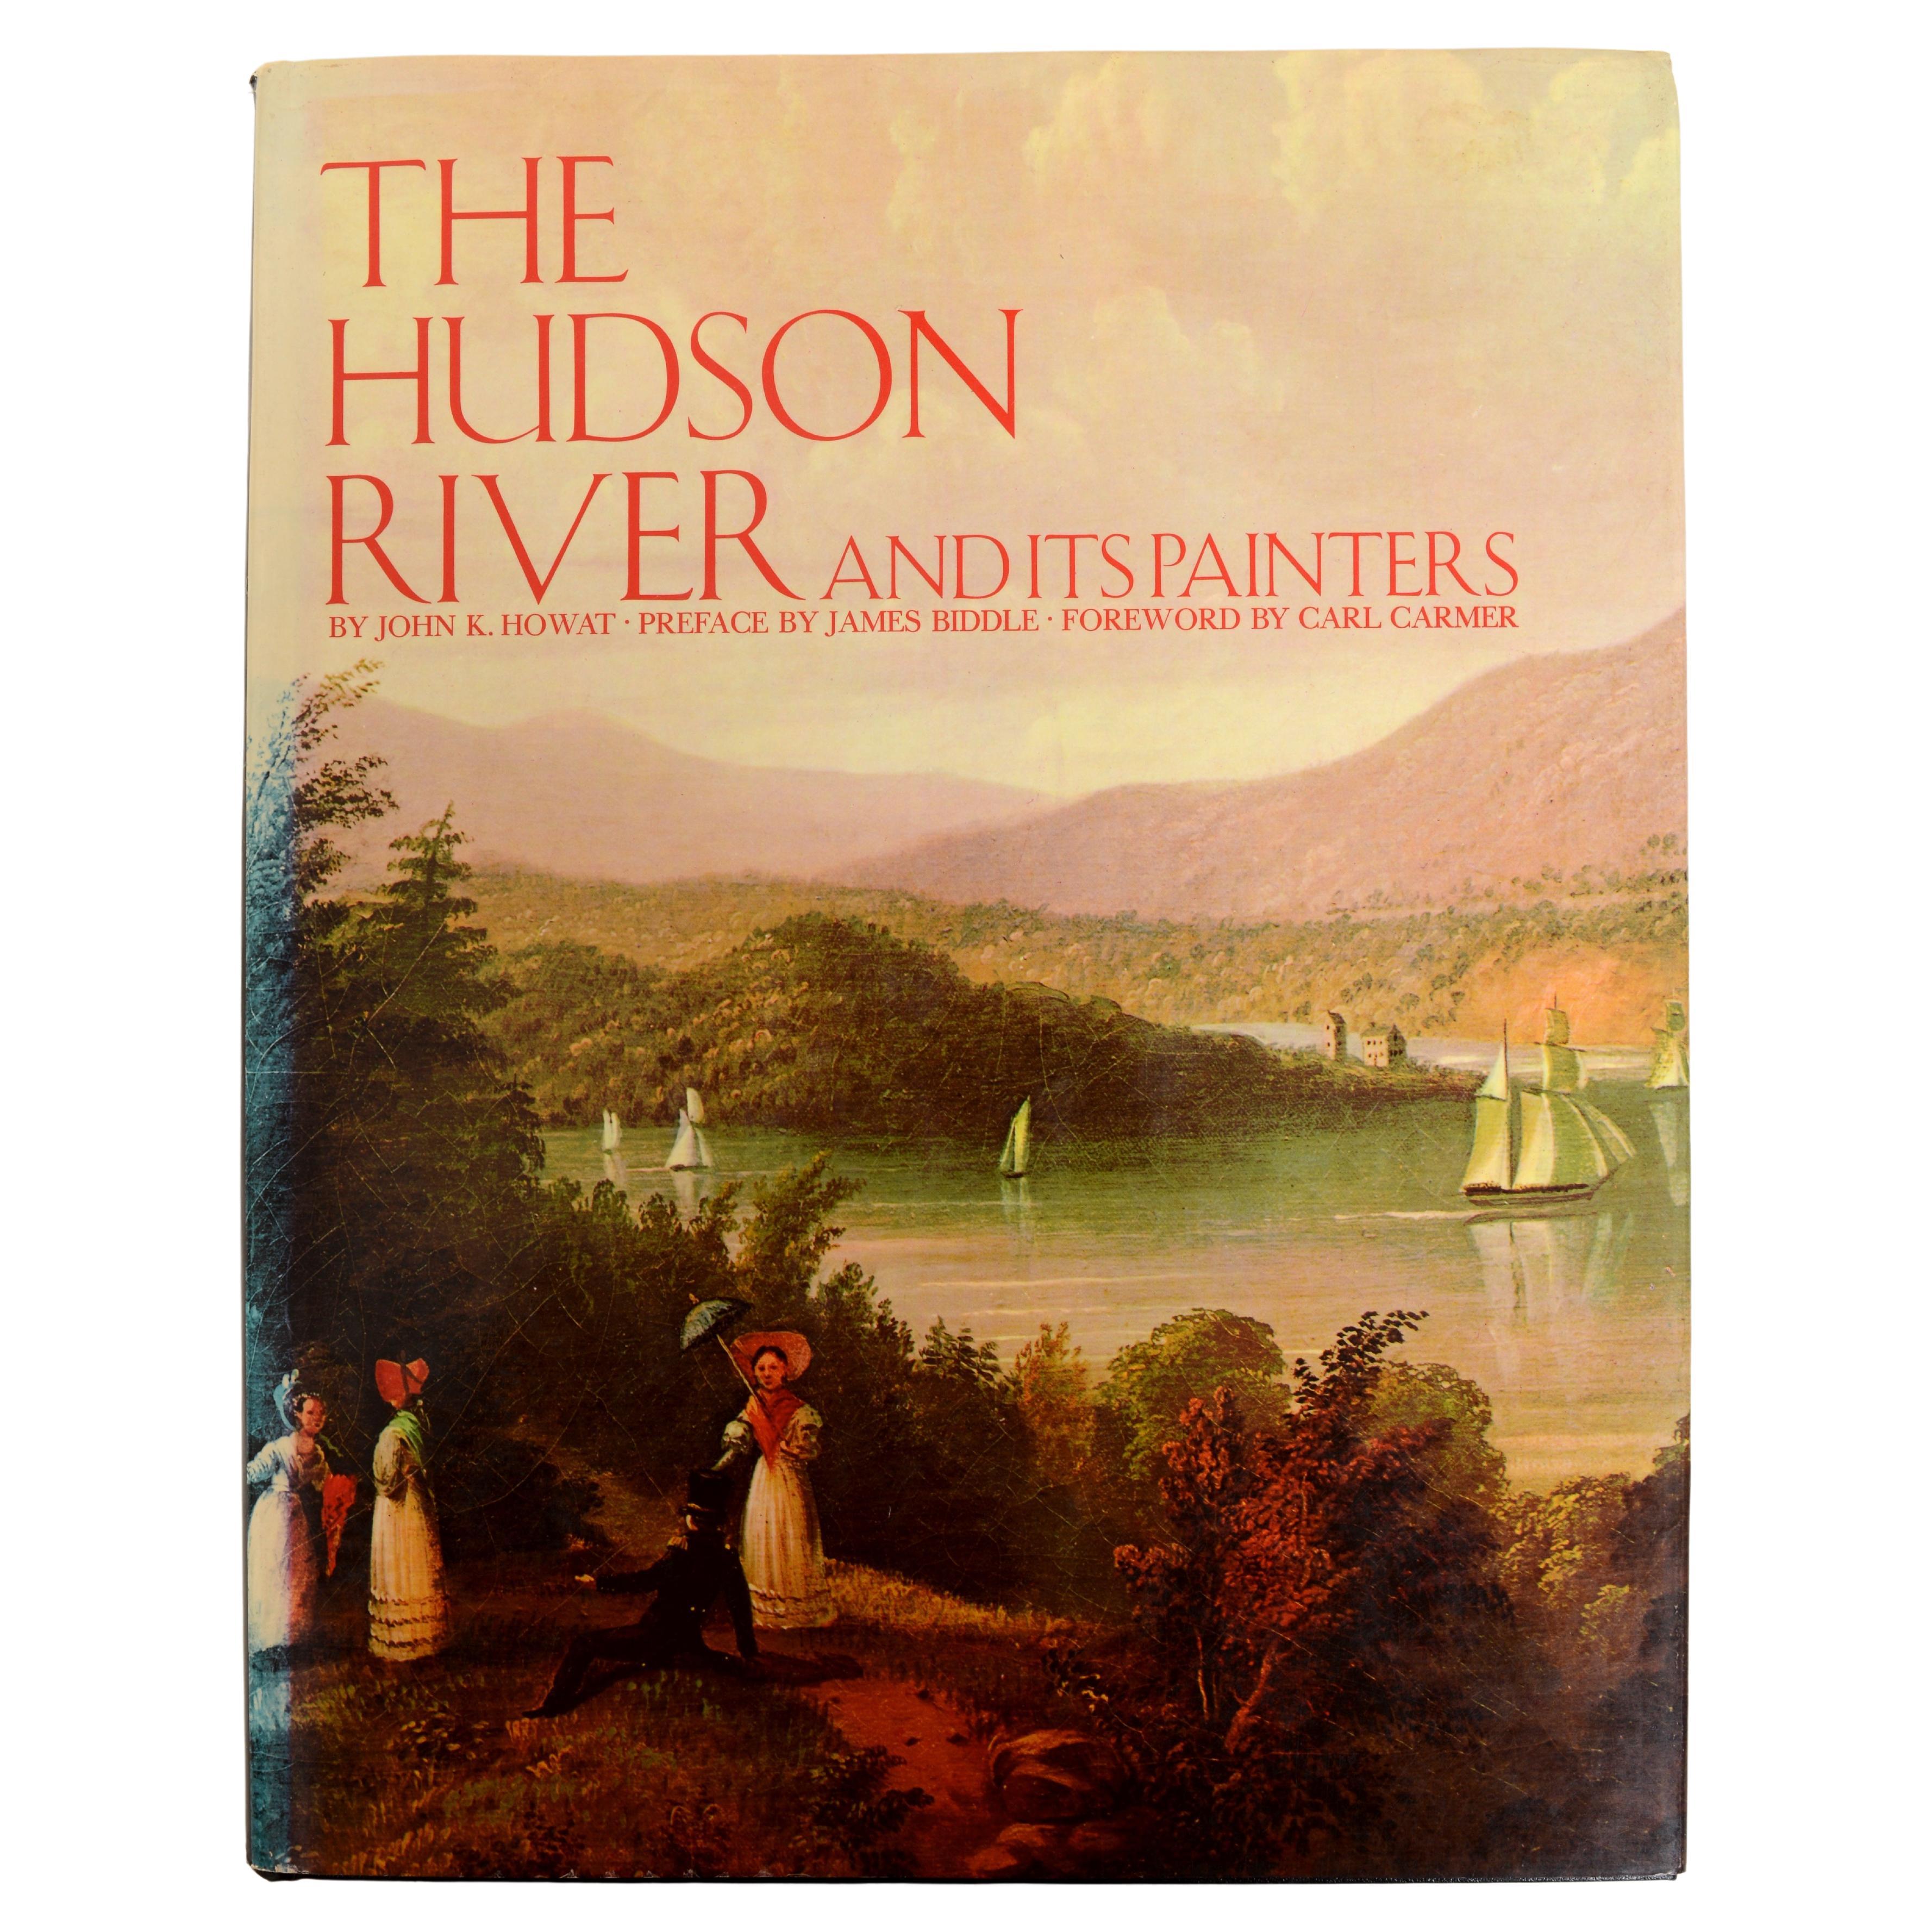 Hudson River And Its Painters by John K. Howat